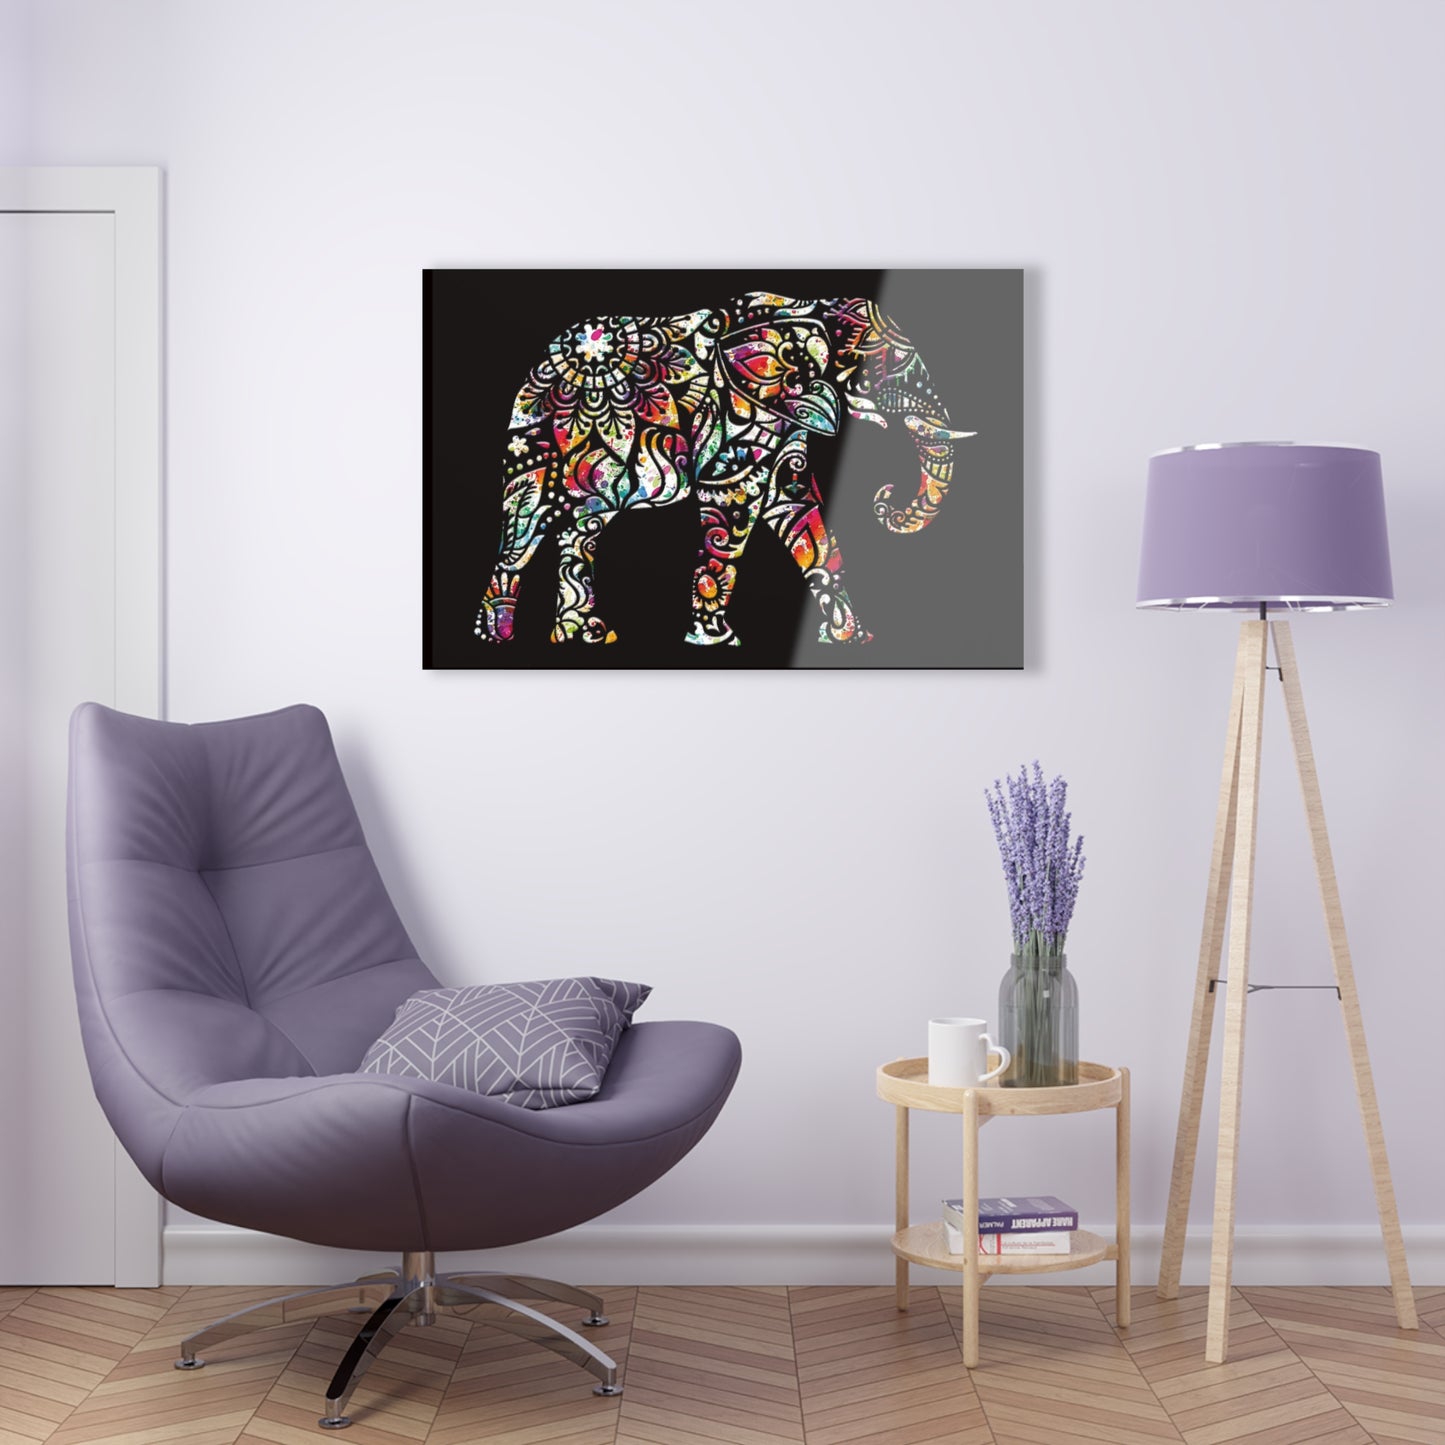 Elephant Themed Wall Art - Multicolor Indian Elephant on Black Background Printed on a Crystal Clear Acrylic Panel 36x24 hung on light wall